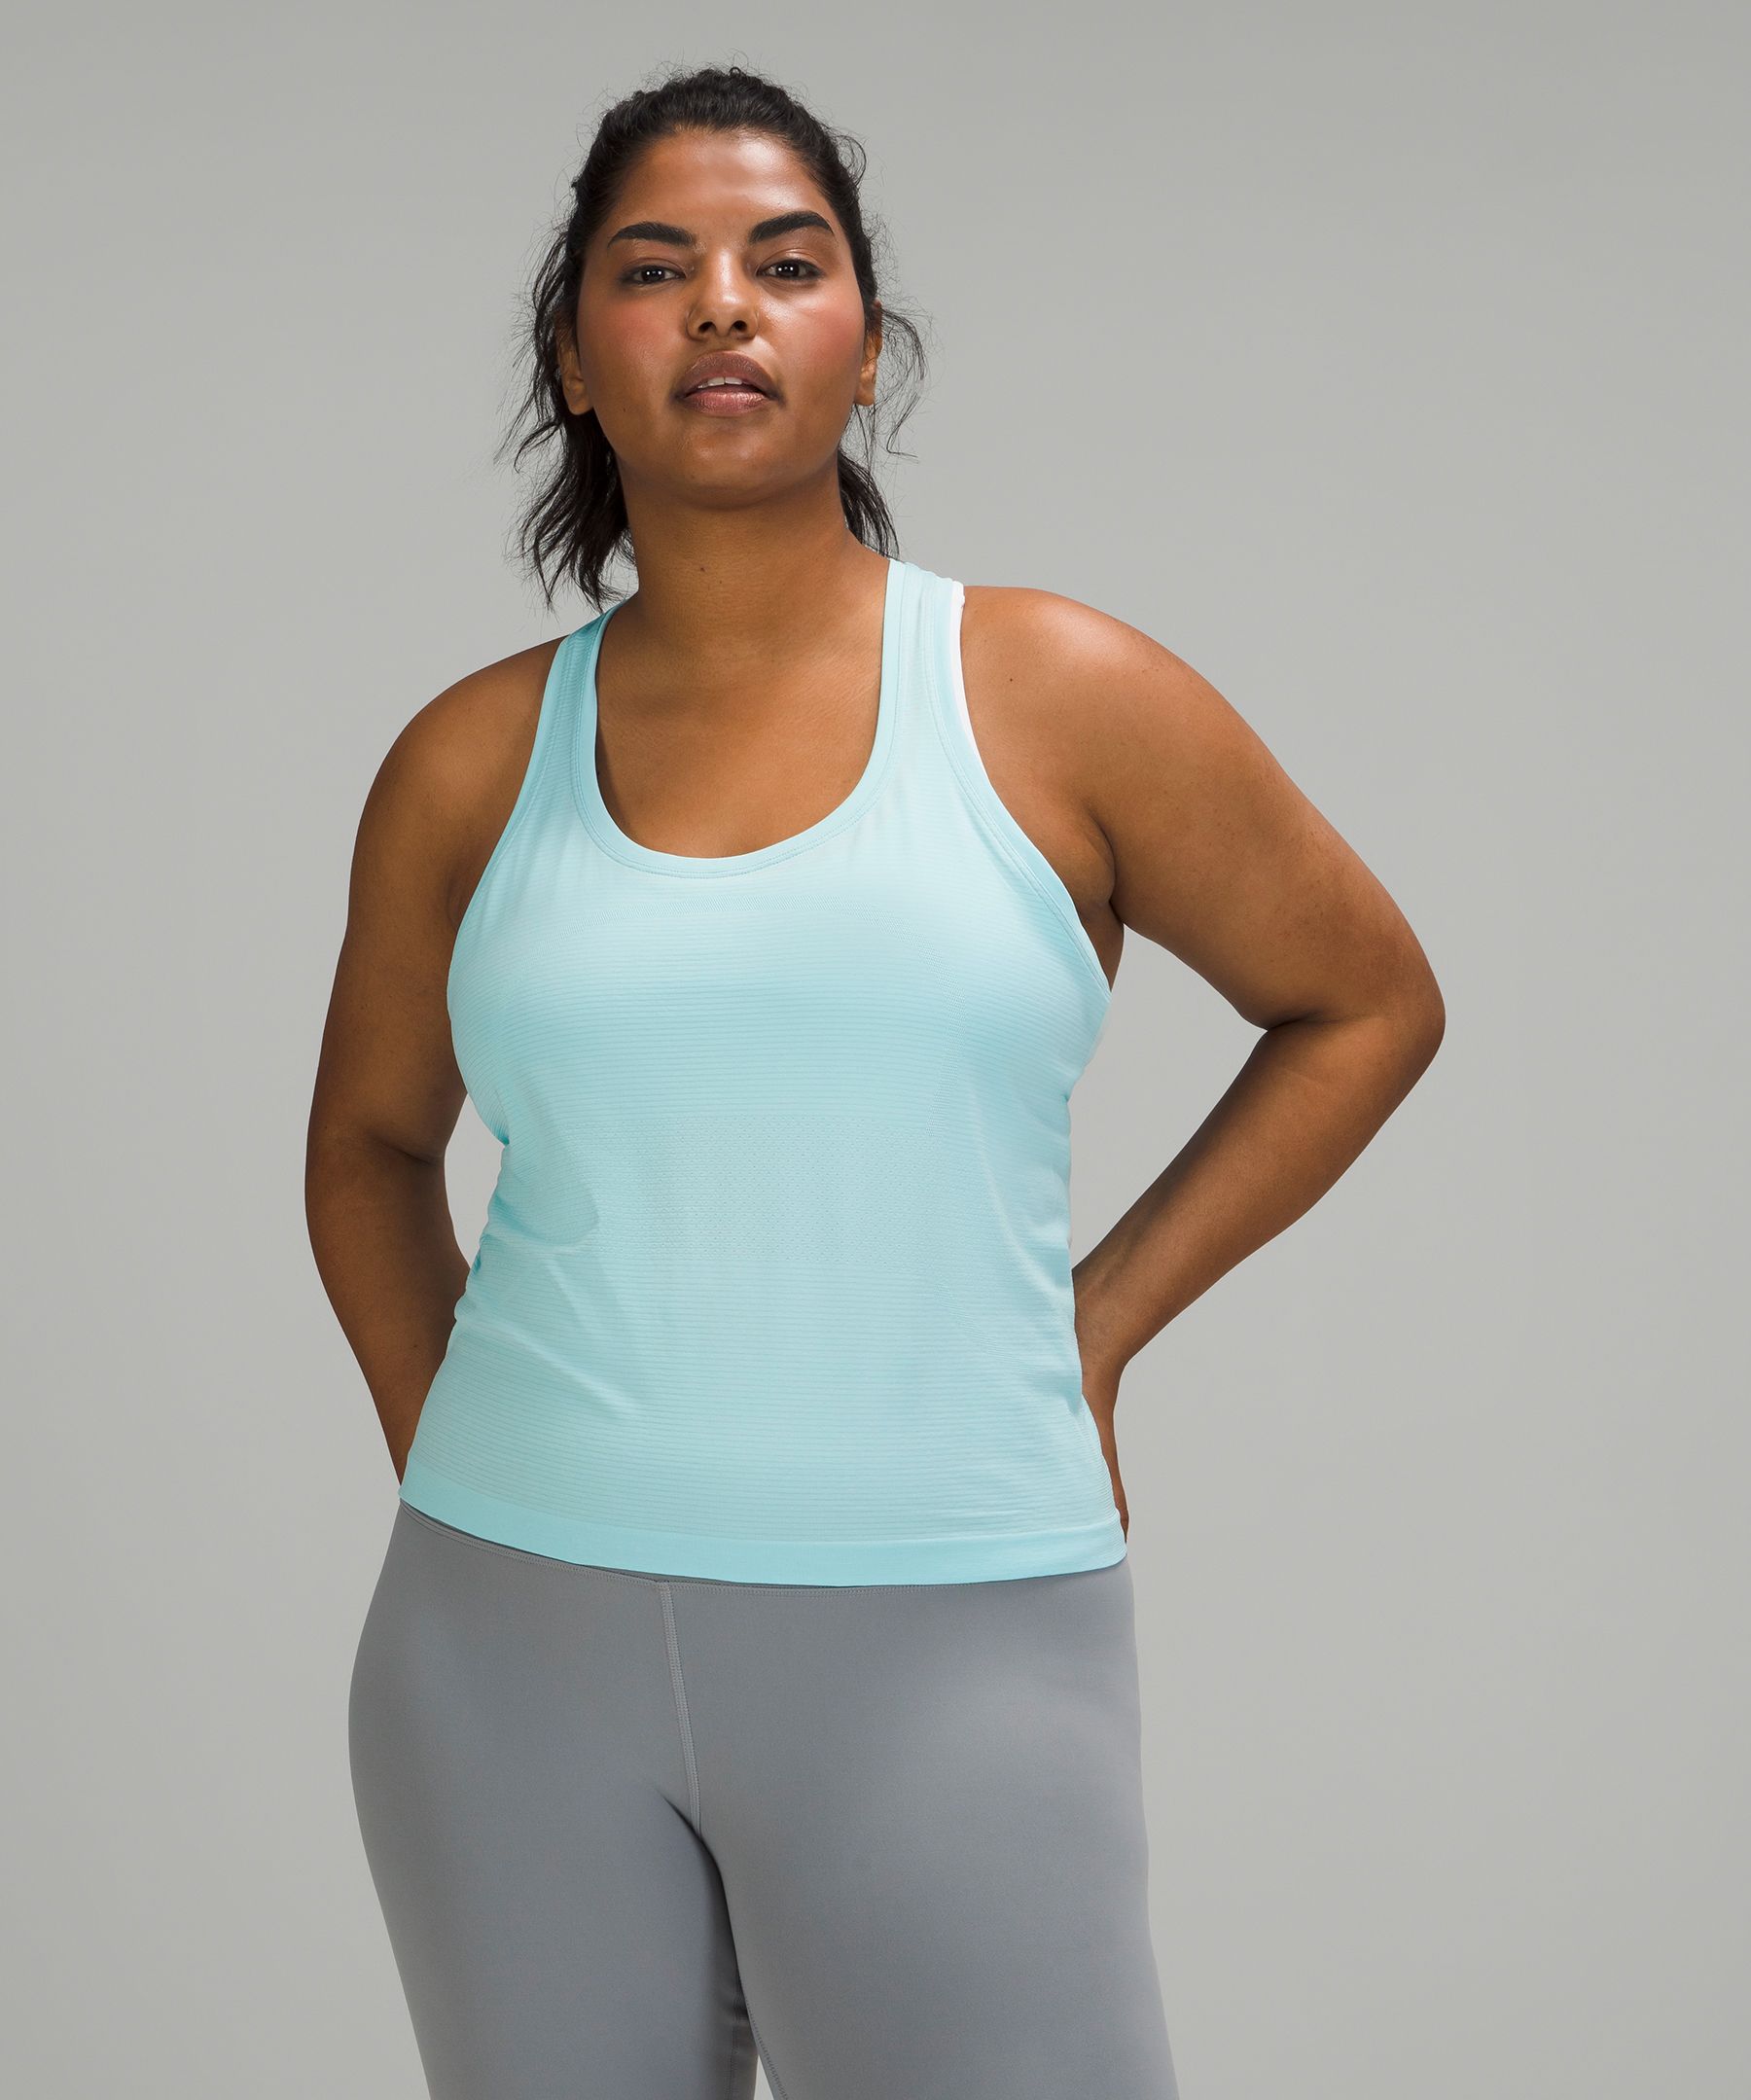 Lululemon's Hyper-Limited Race Collection Is Available Online This